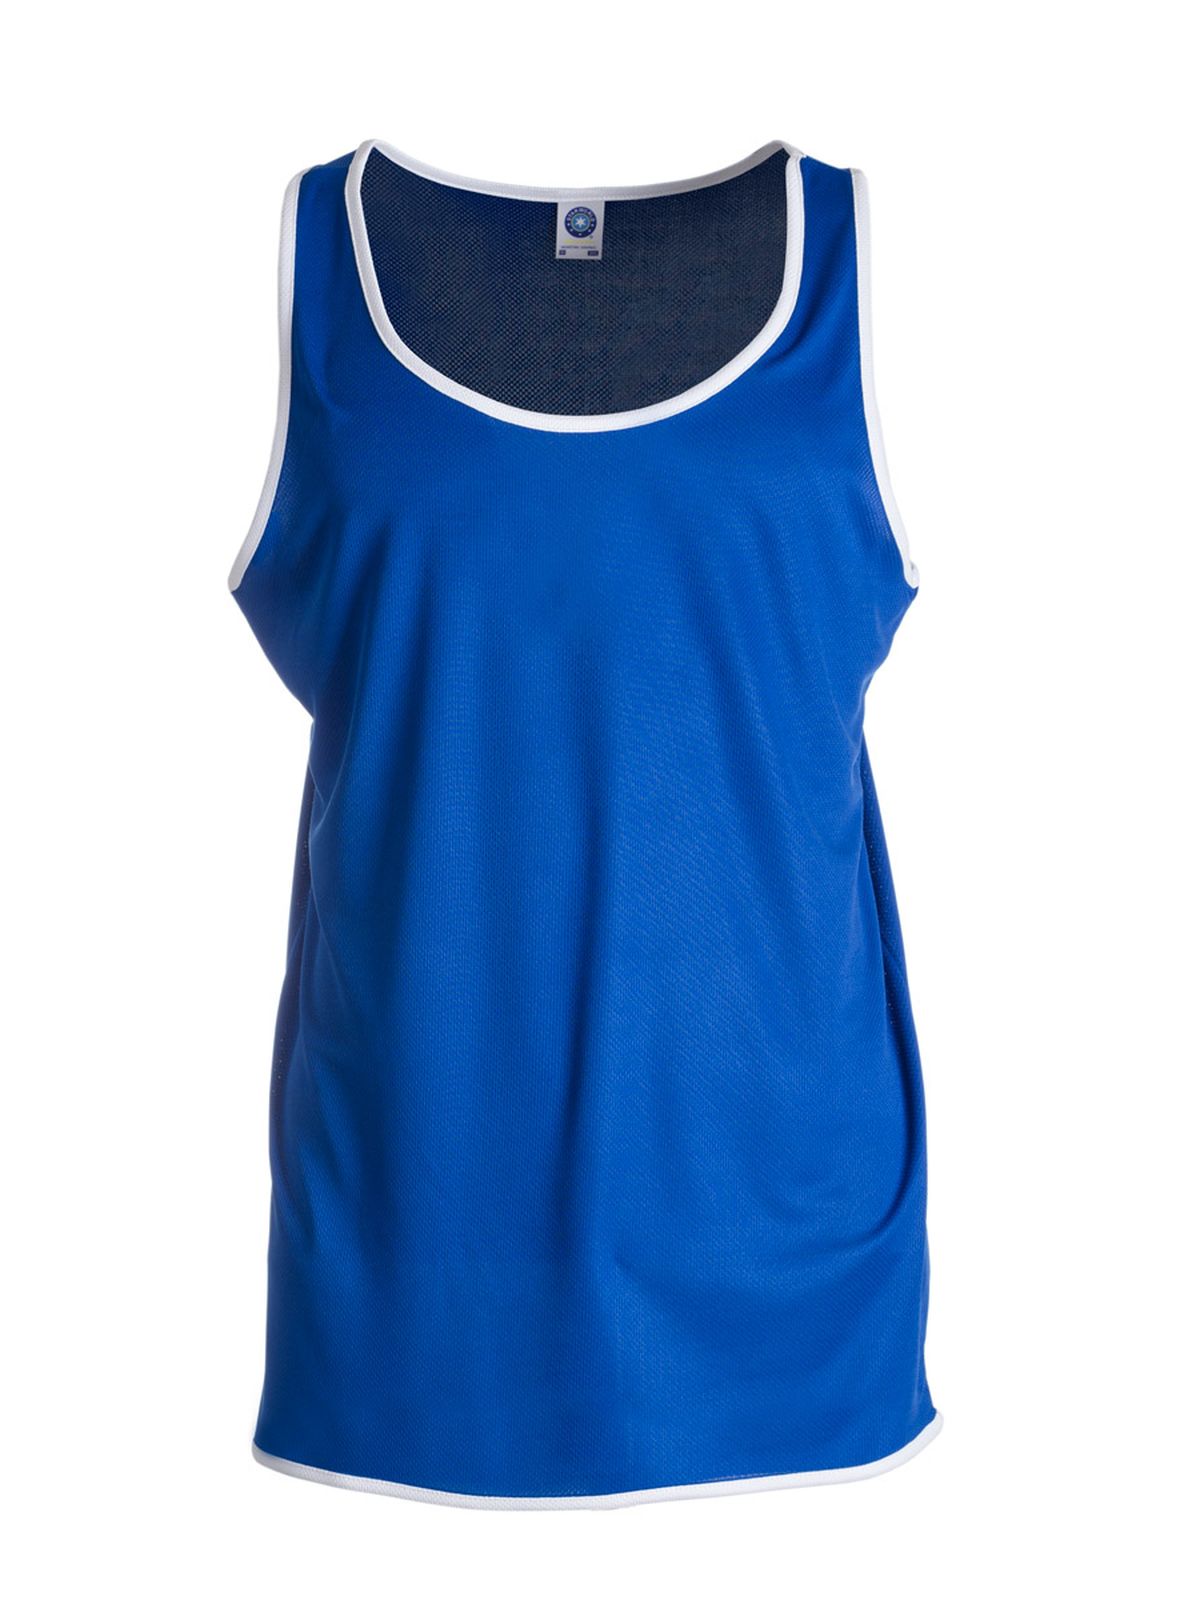 ultra-tech-contrast-running-and-sports-vest-deep-royal-white.webp